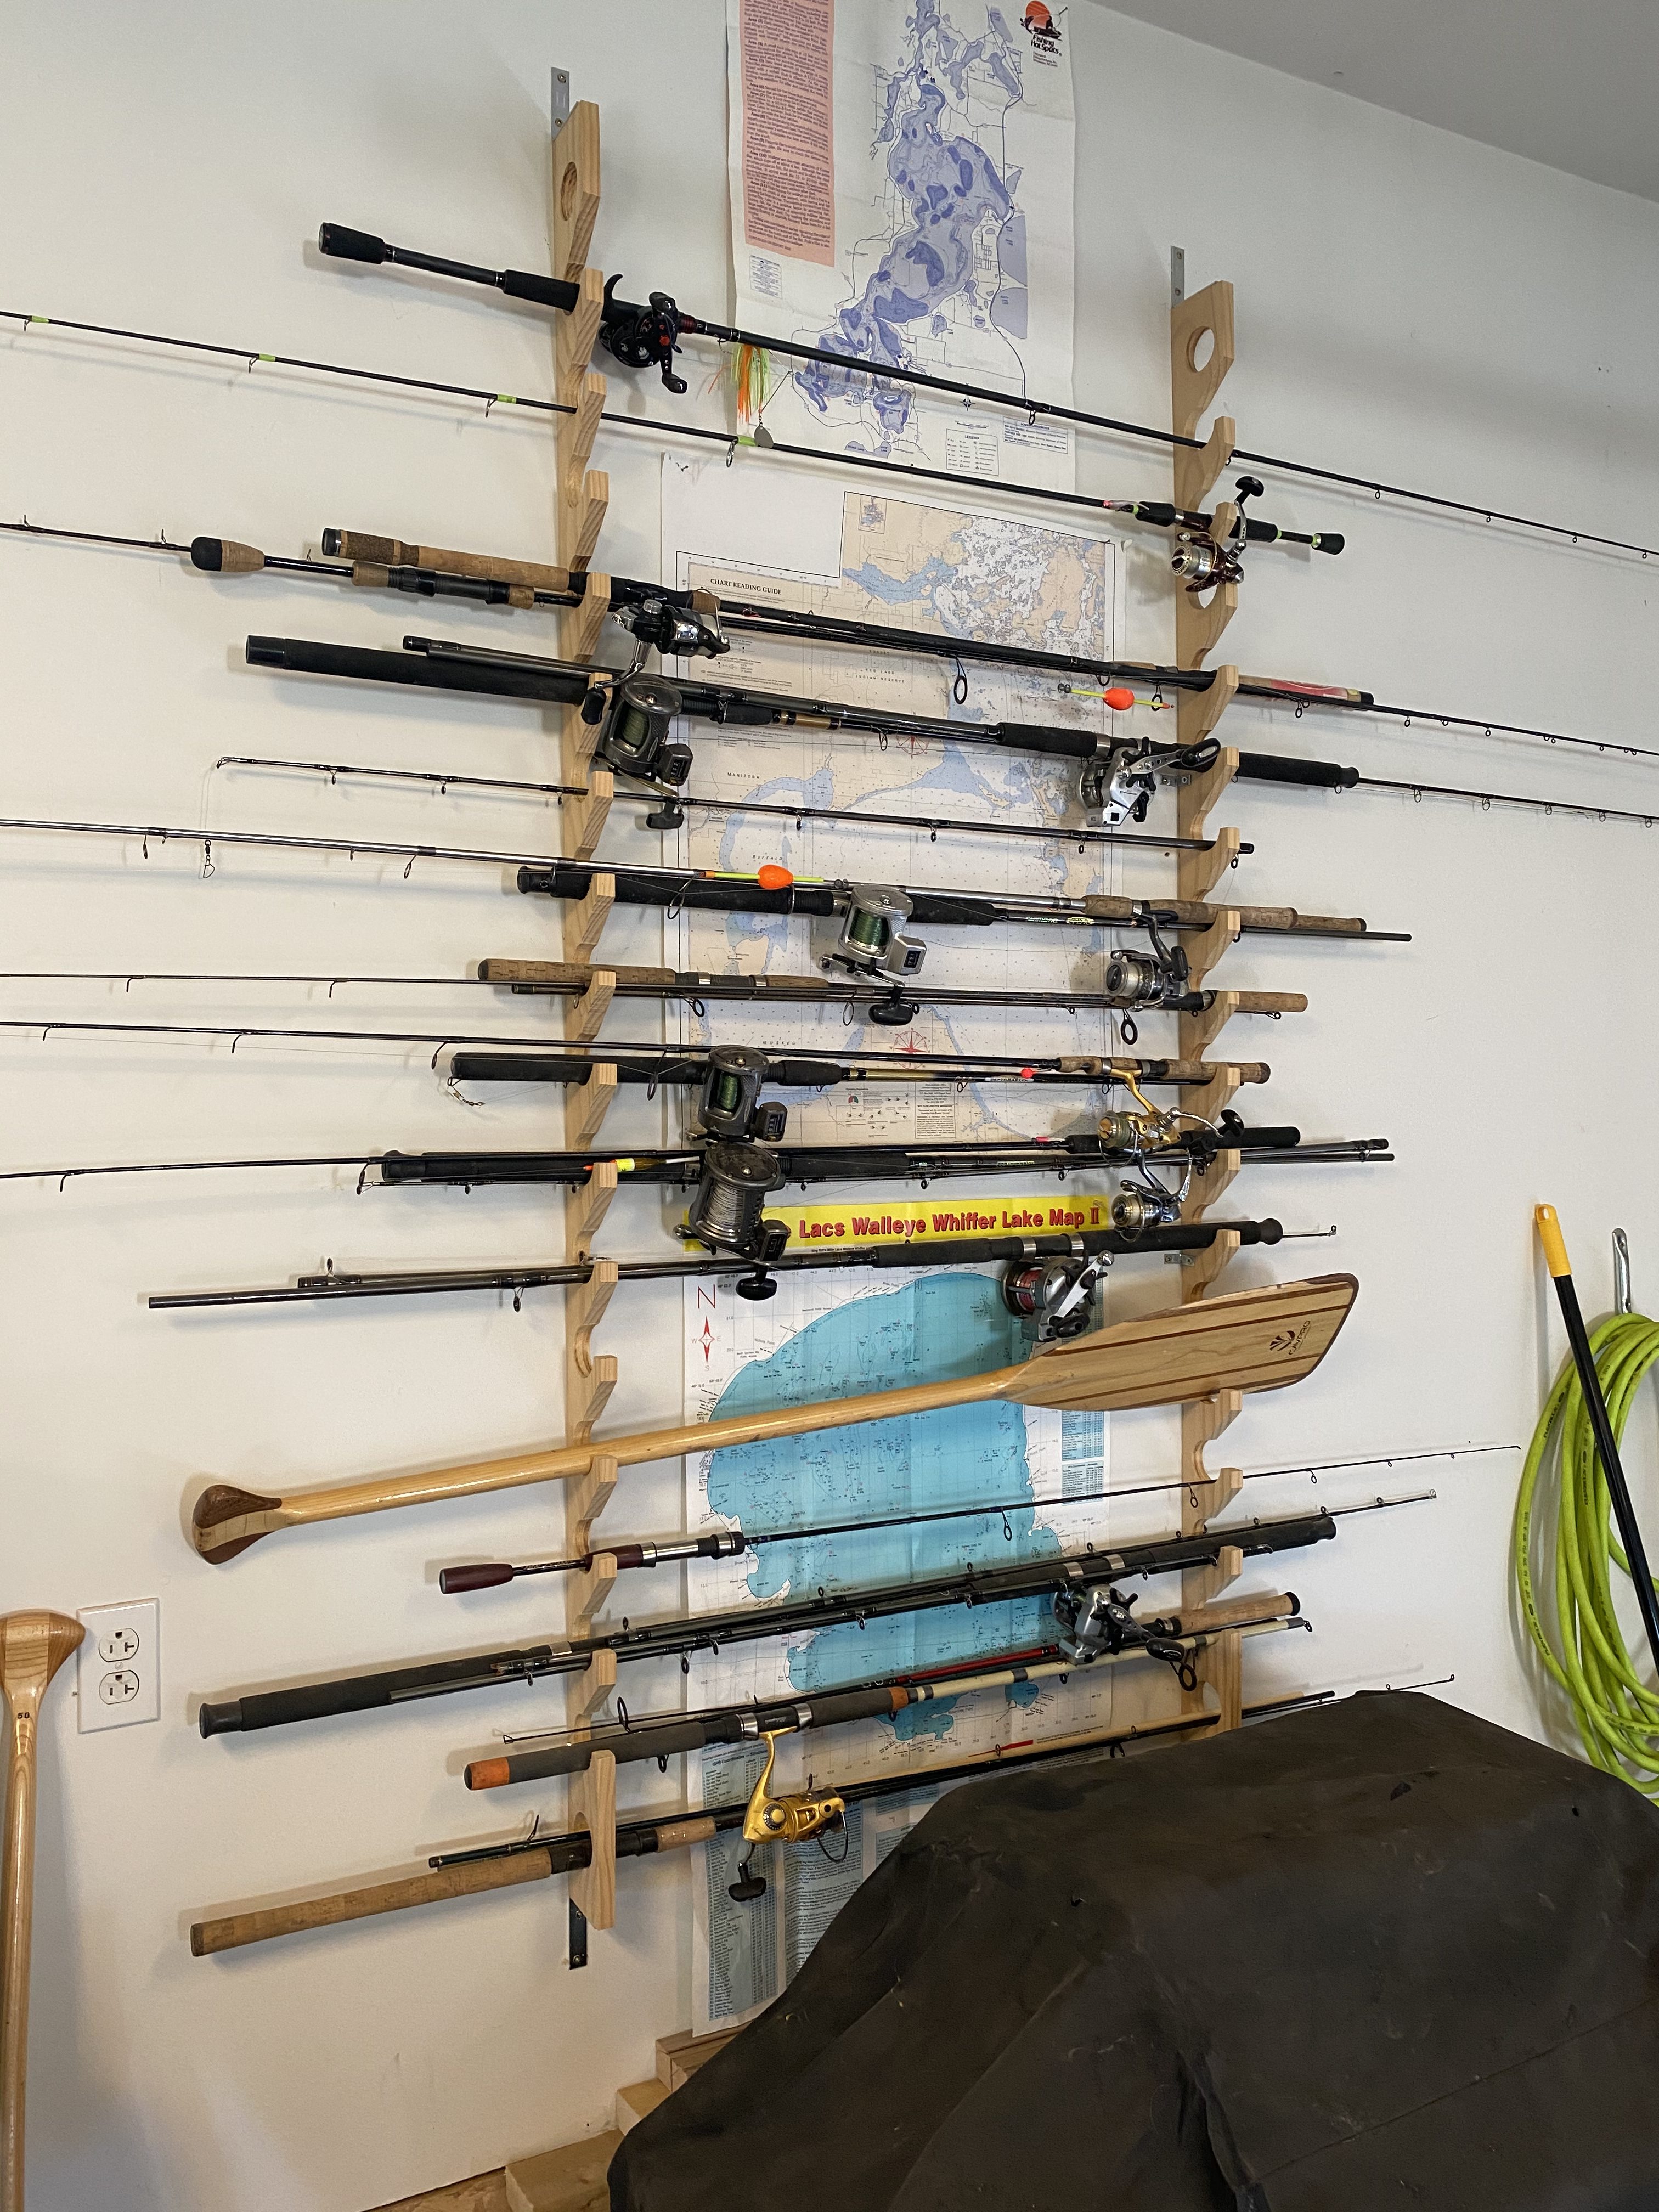 Rod rack for the garage - General Discussion Forum - General